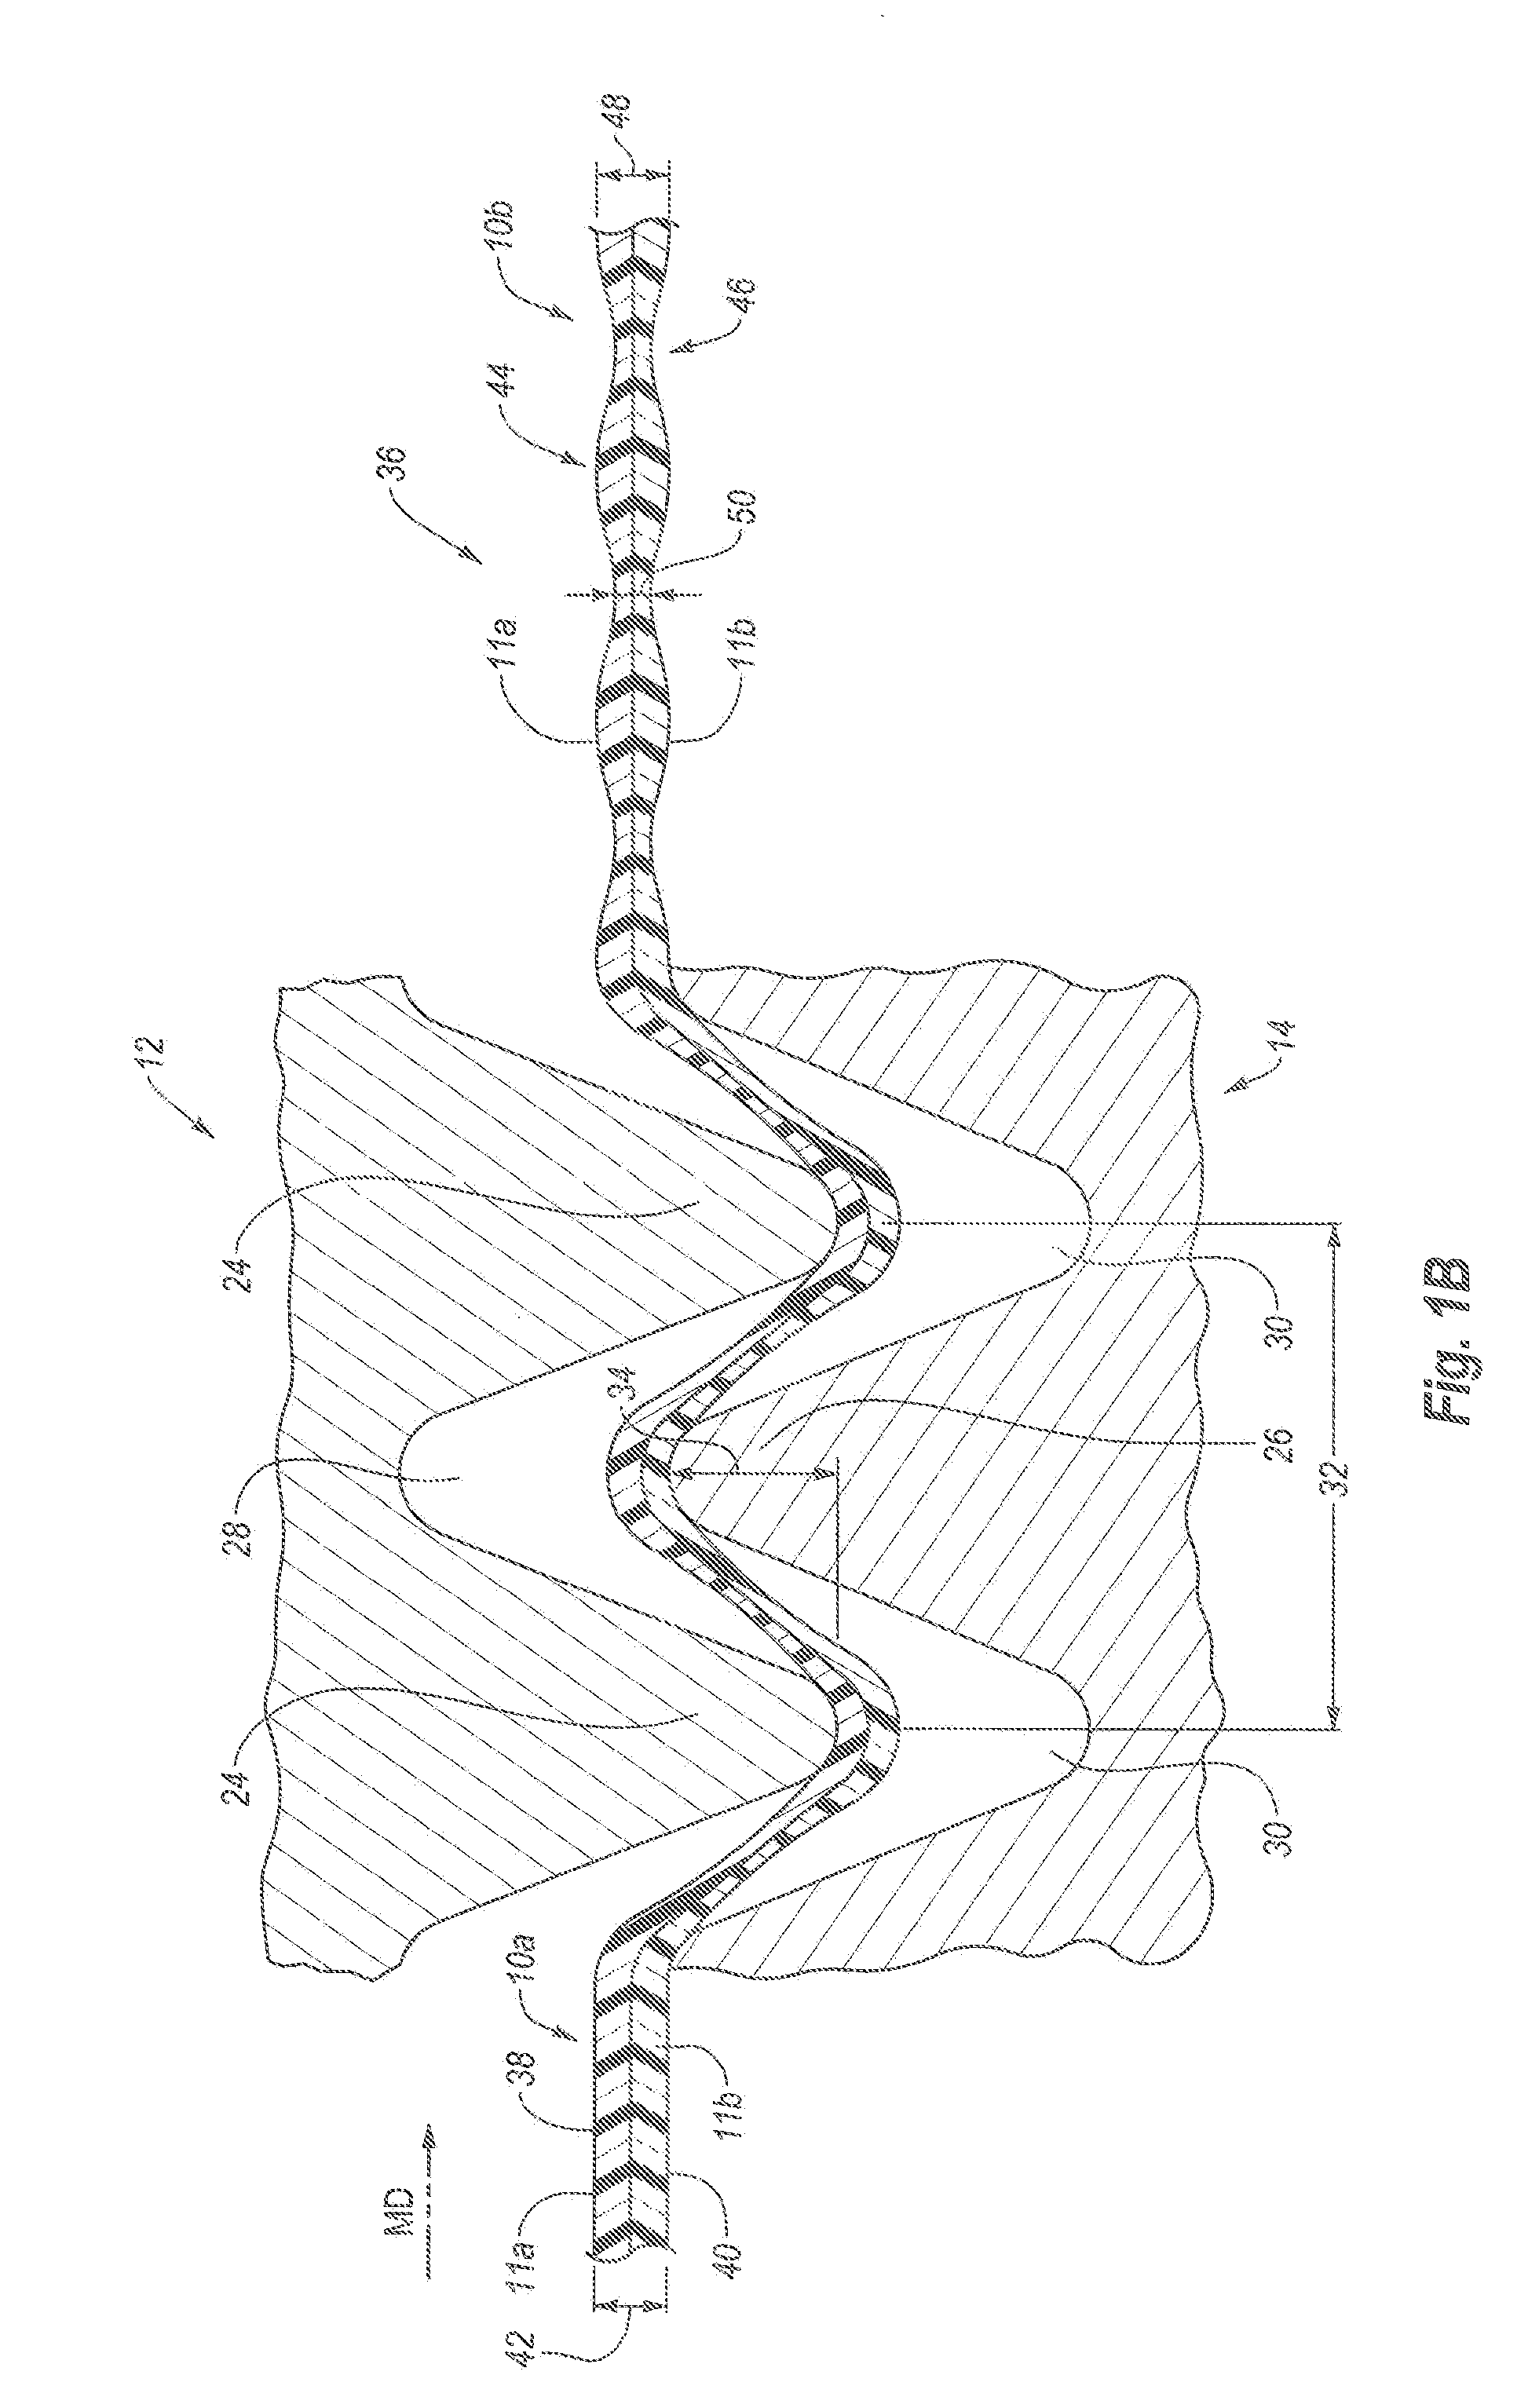 Multi-Layered Films With Visually-Distinct Regions and Methods of Making The Same